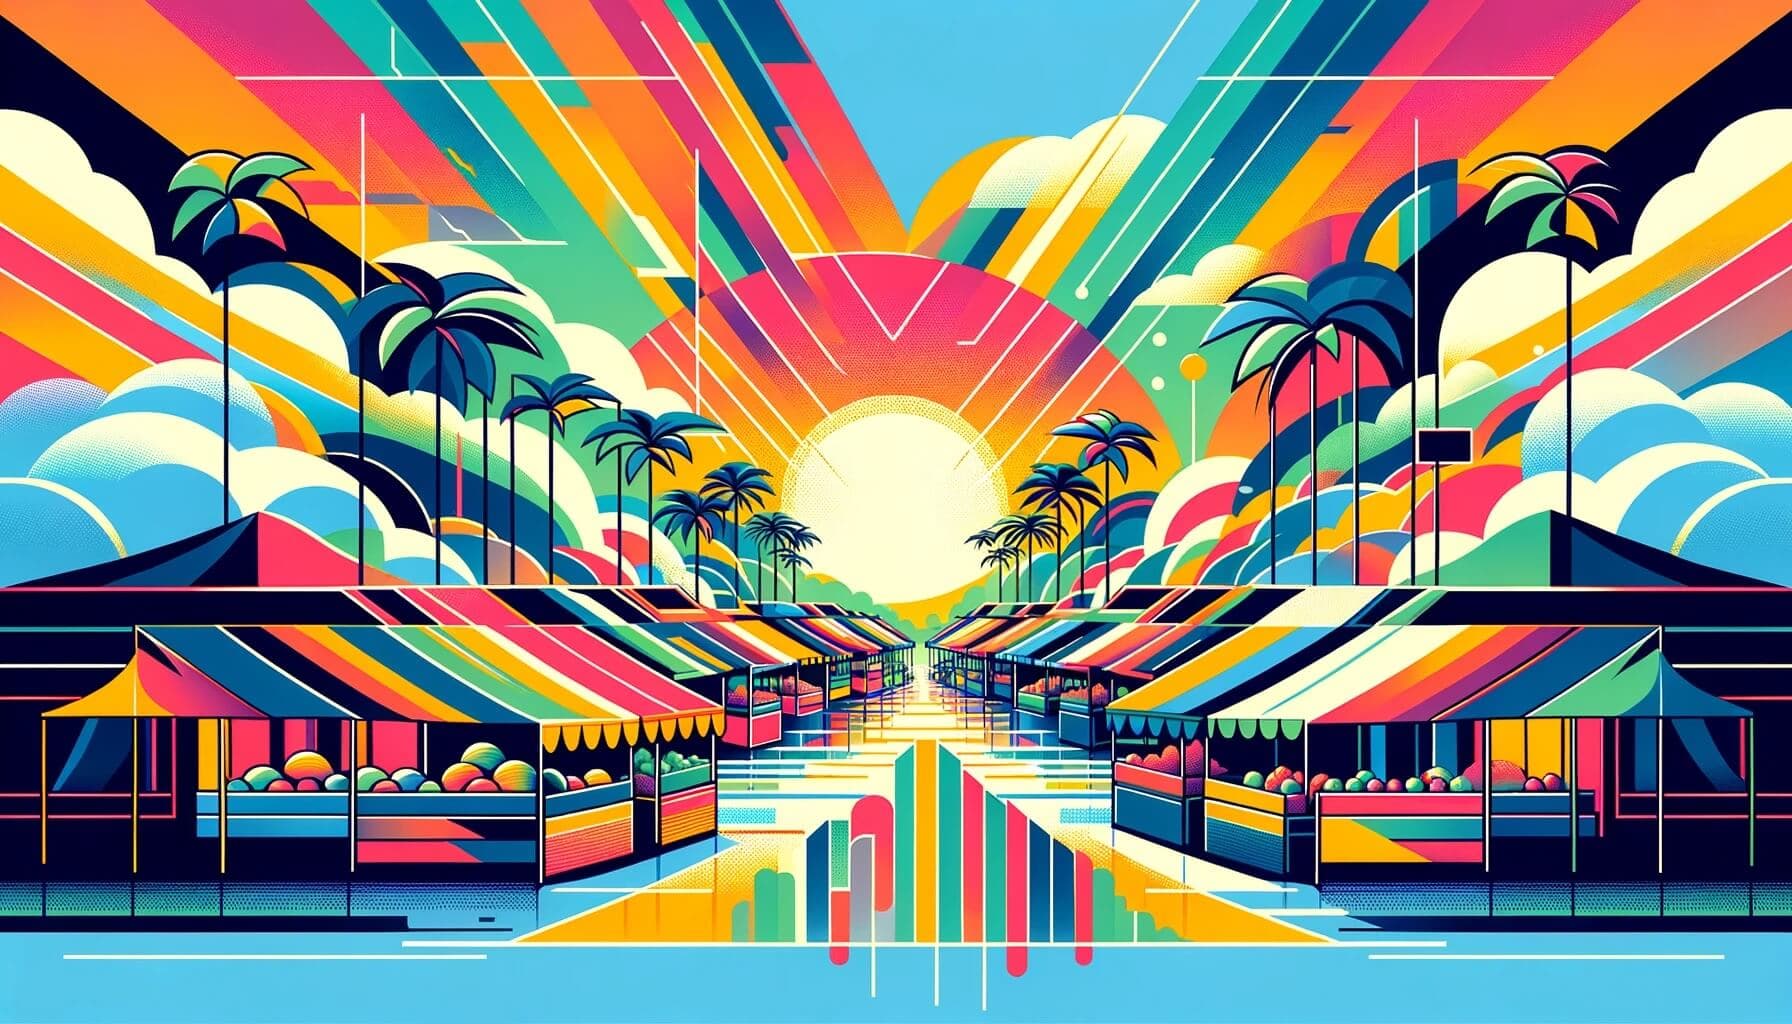 A geometric tropical landscape conceptualizing the simplicity, vibrancy and accessibility enabled by the proposed algorithmic BRICS digital currency built on blockchain, with stylized motifs like palm trees and sunrays representing its seamless integration across member nations.